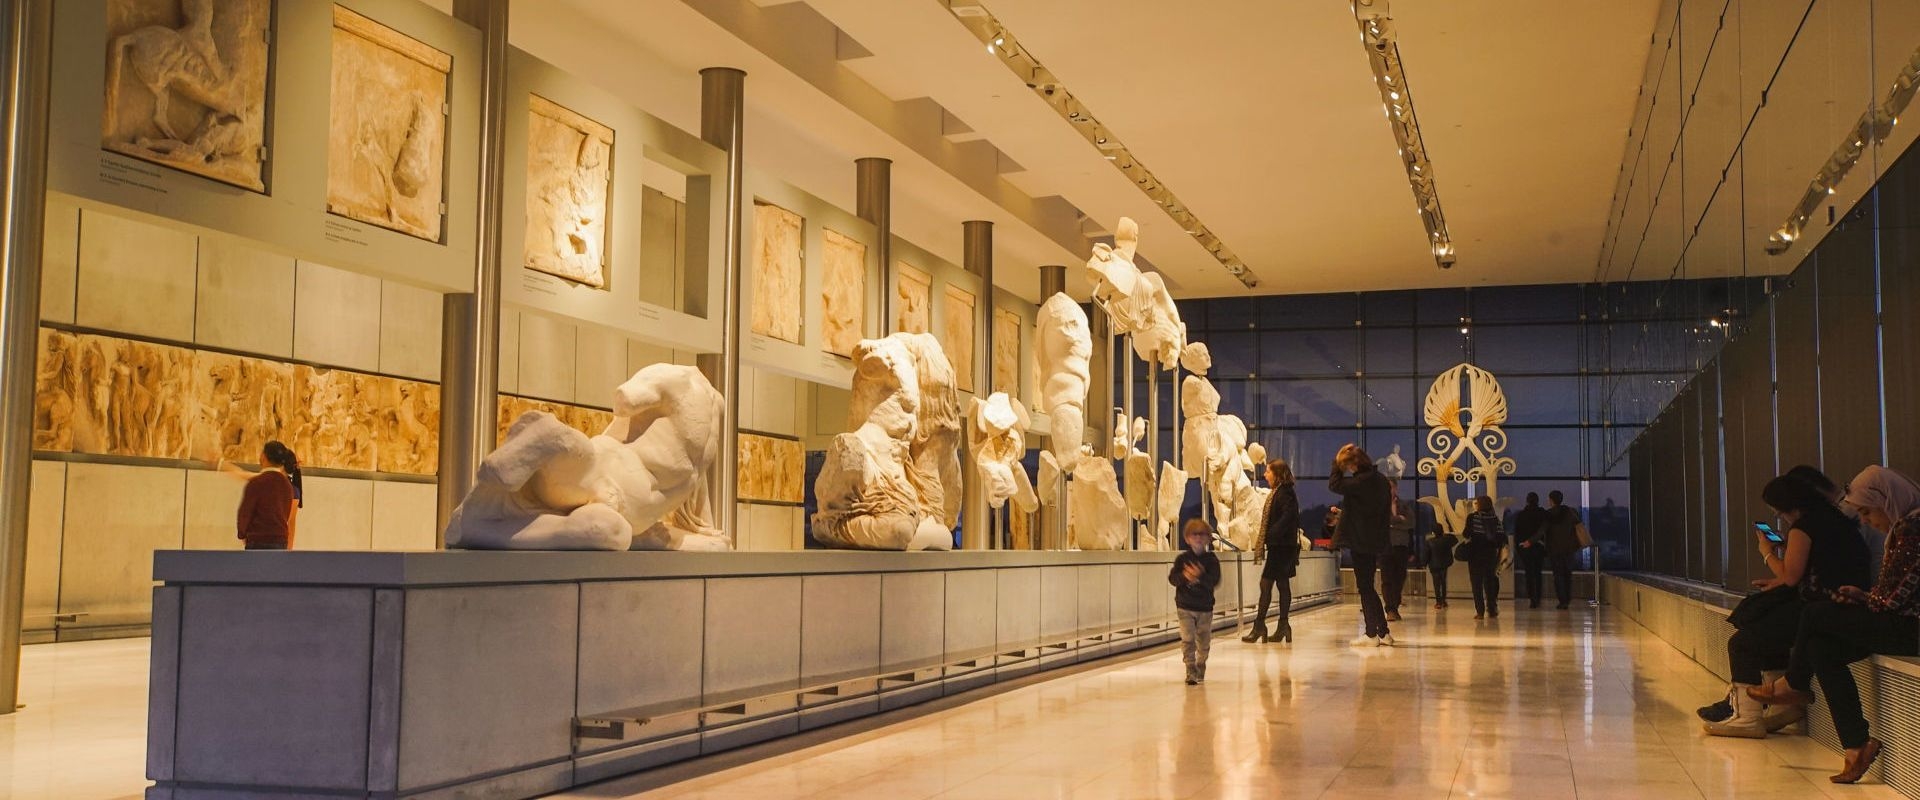 TOP 10 Iconic Museums and Galleries You Can Visit Virtually From Home